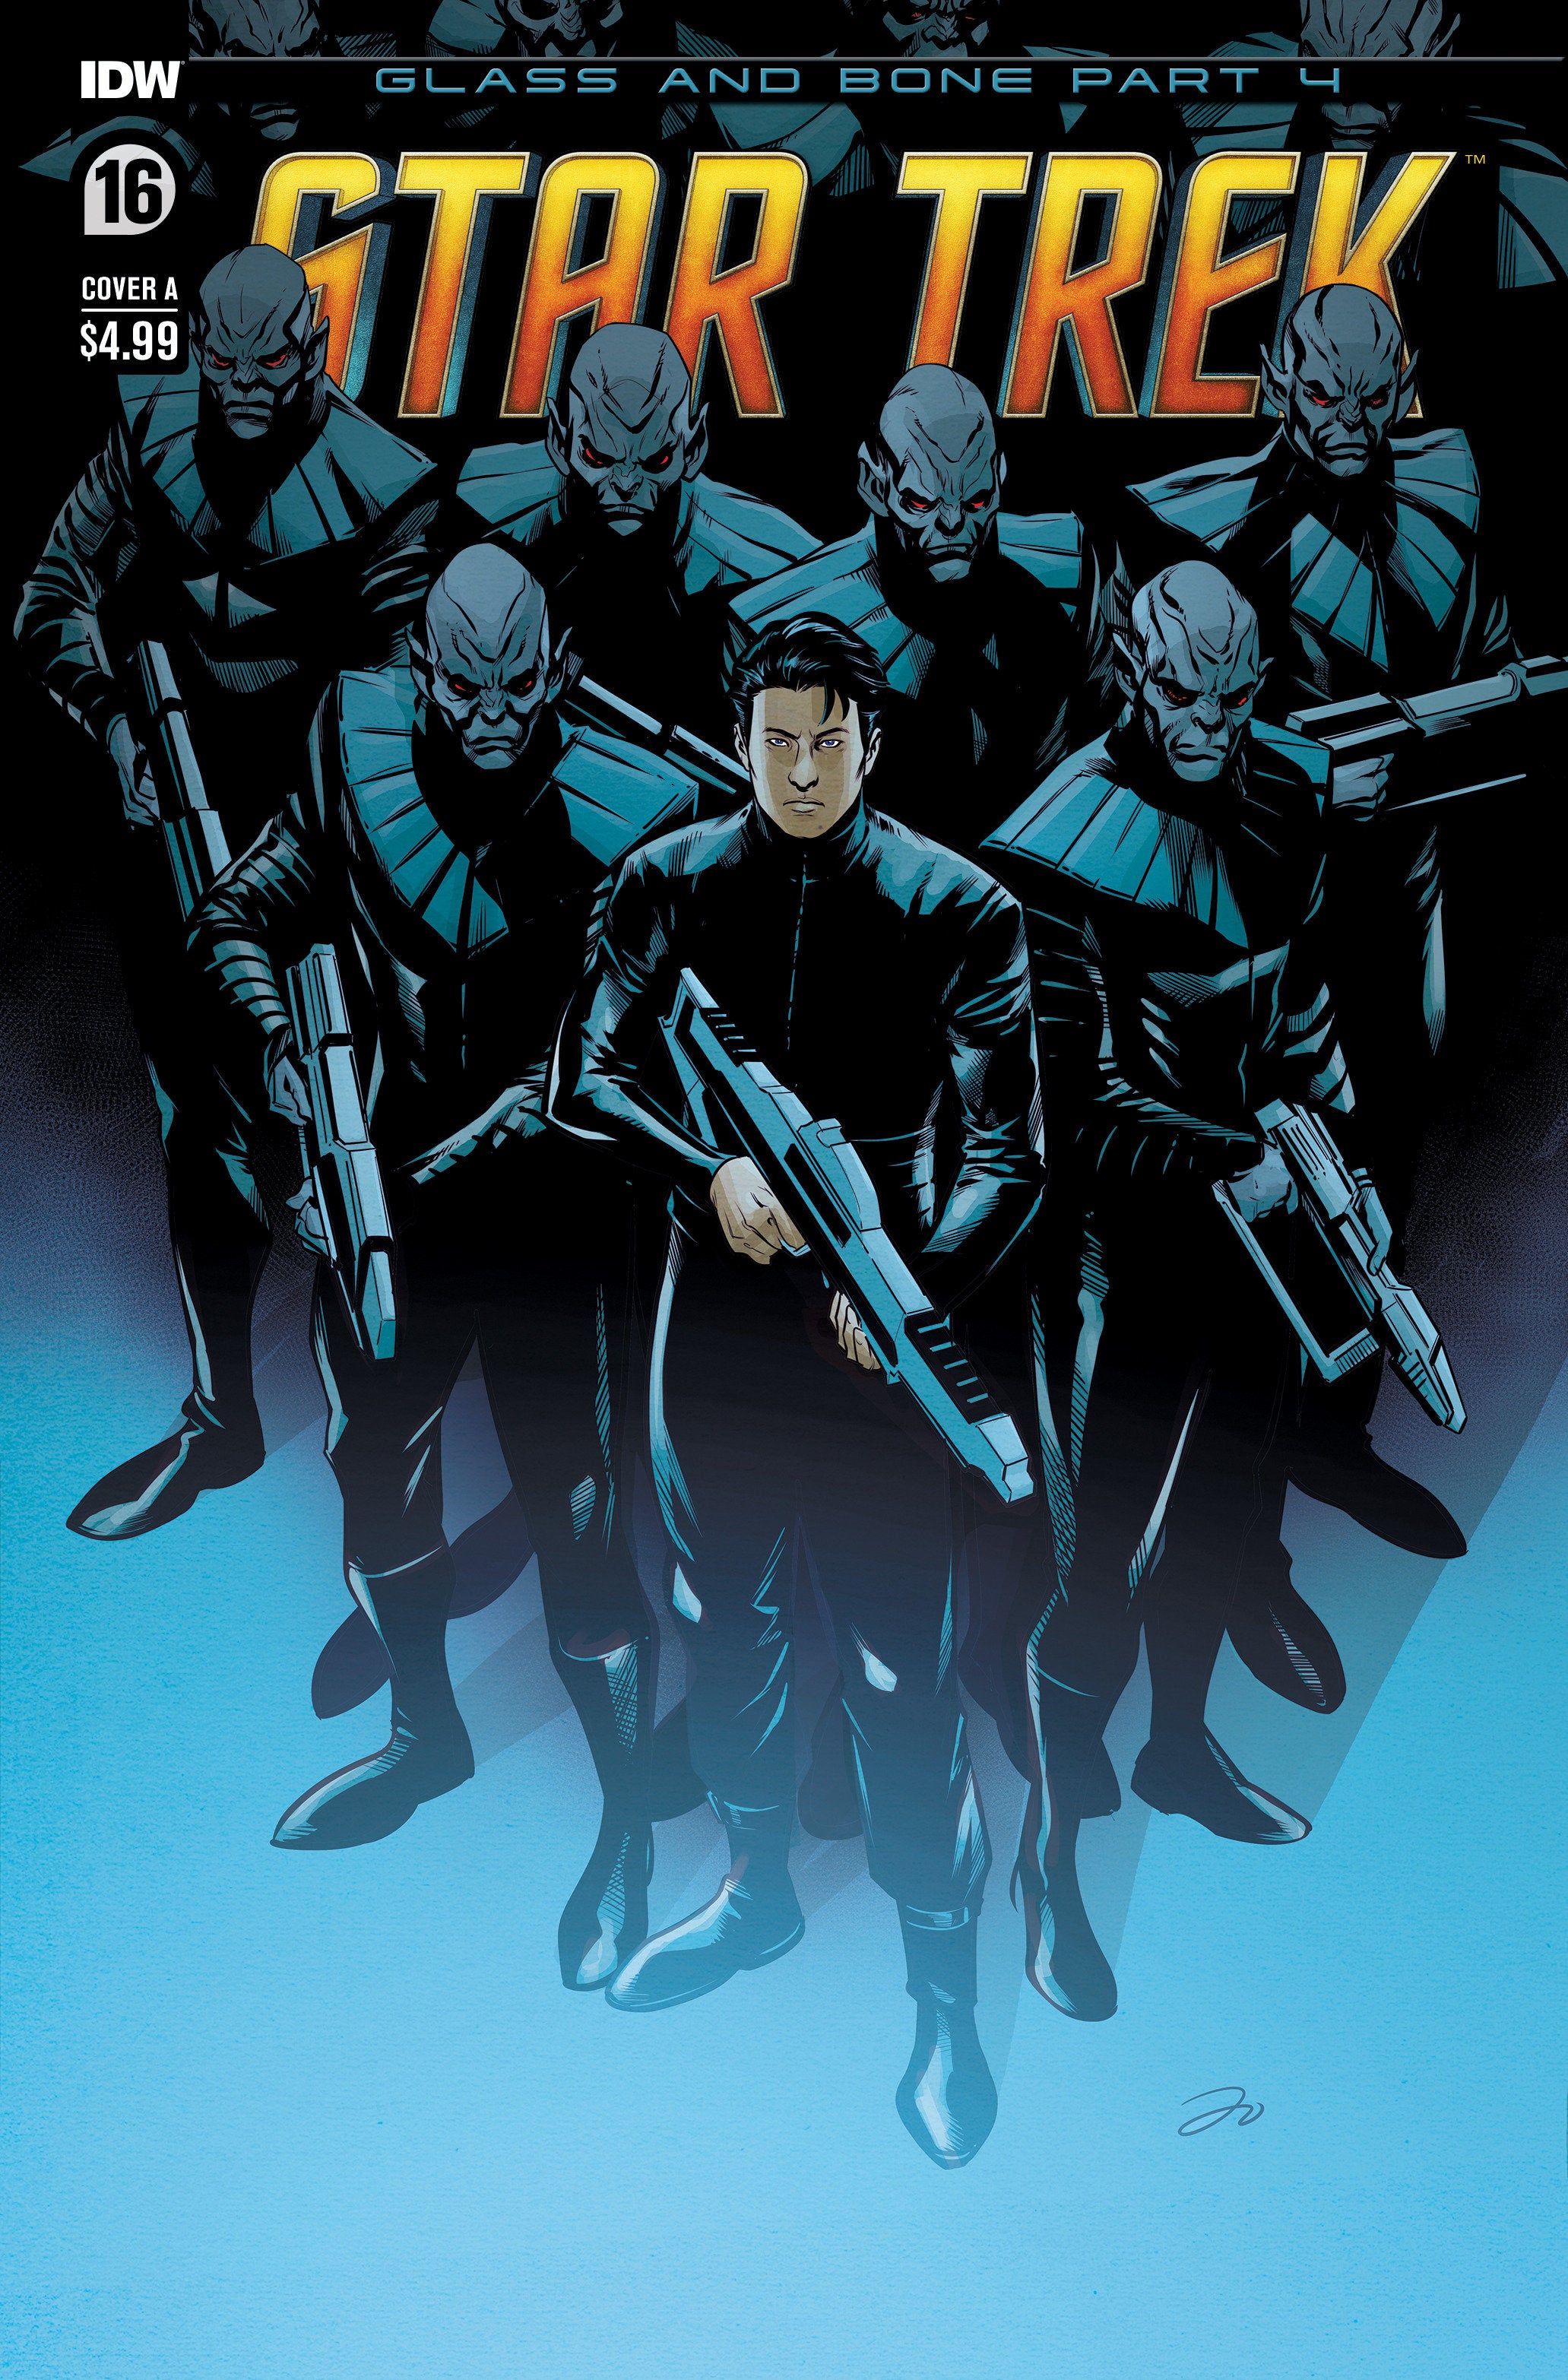 Star Trek #16 Cover A (To) | Game Master's Emporium (The New GME)